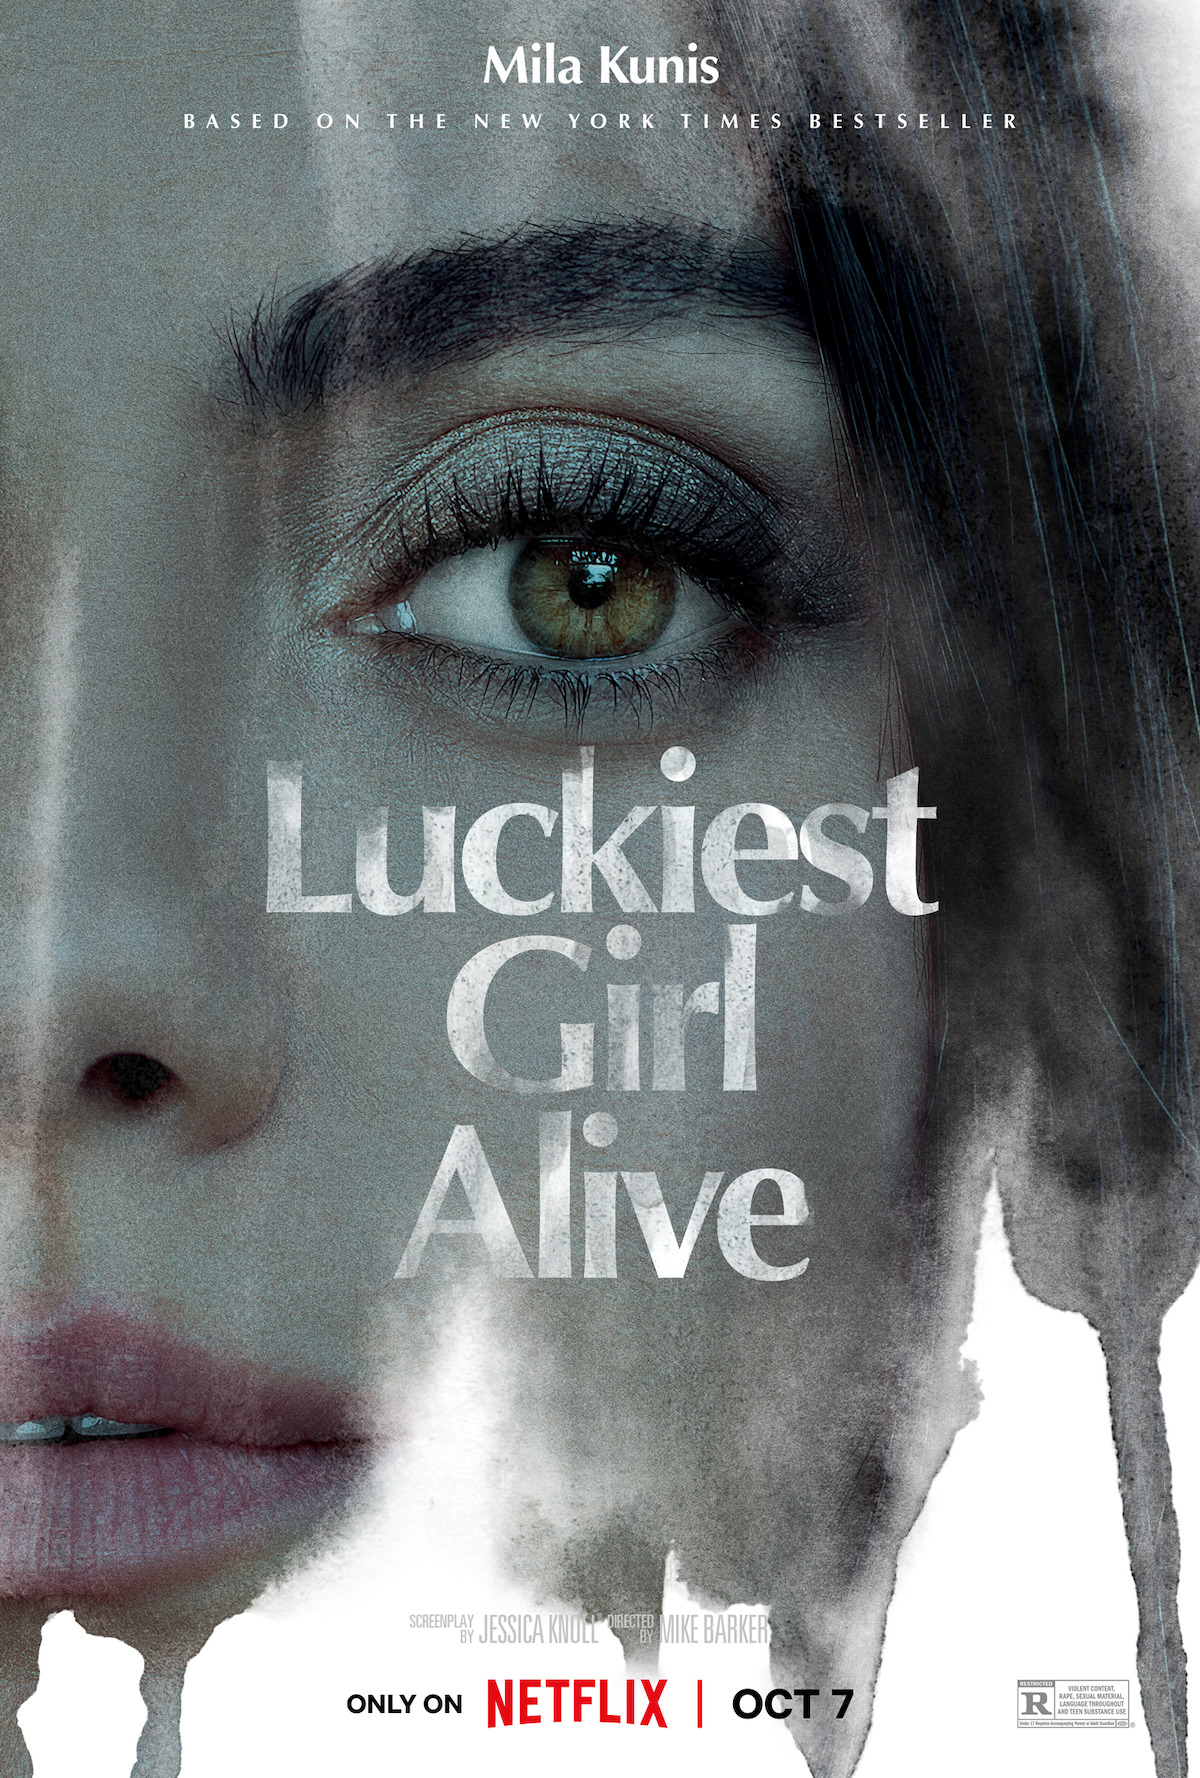 Luckiest Girl Alive Trailer and First Look Photos Dropped picture